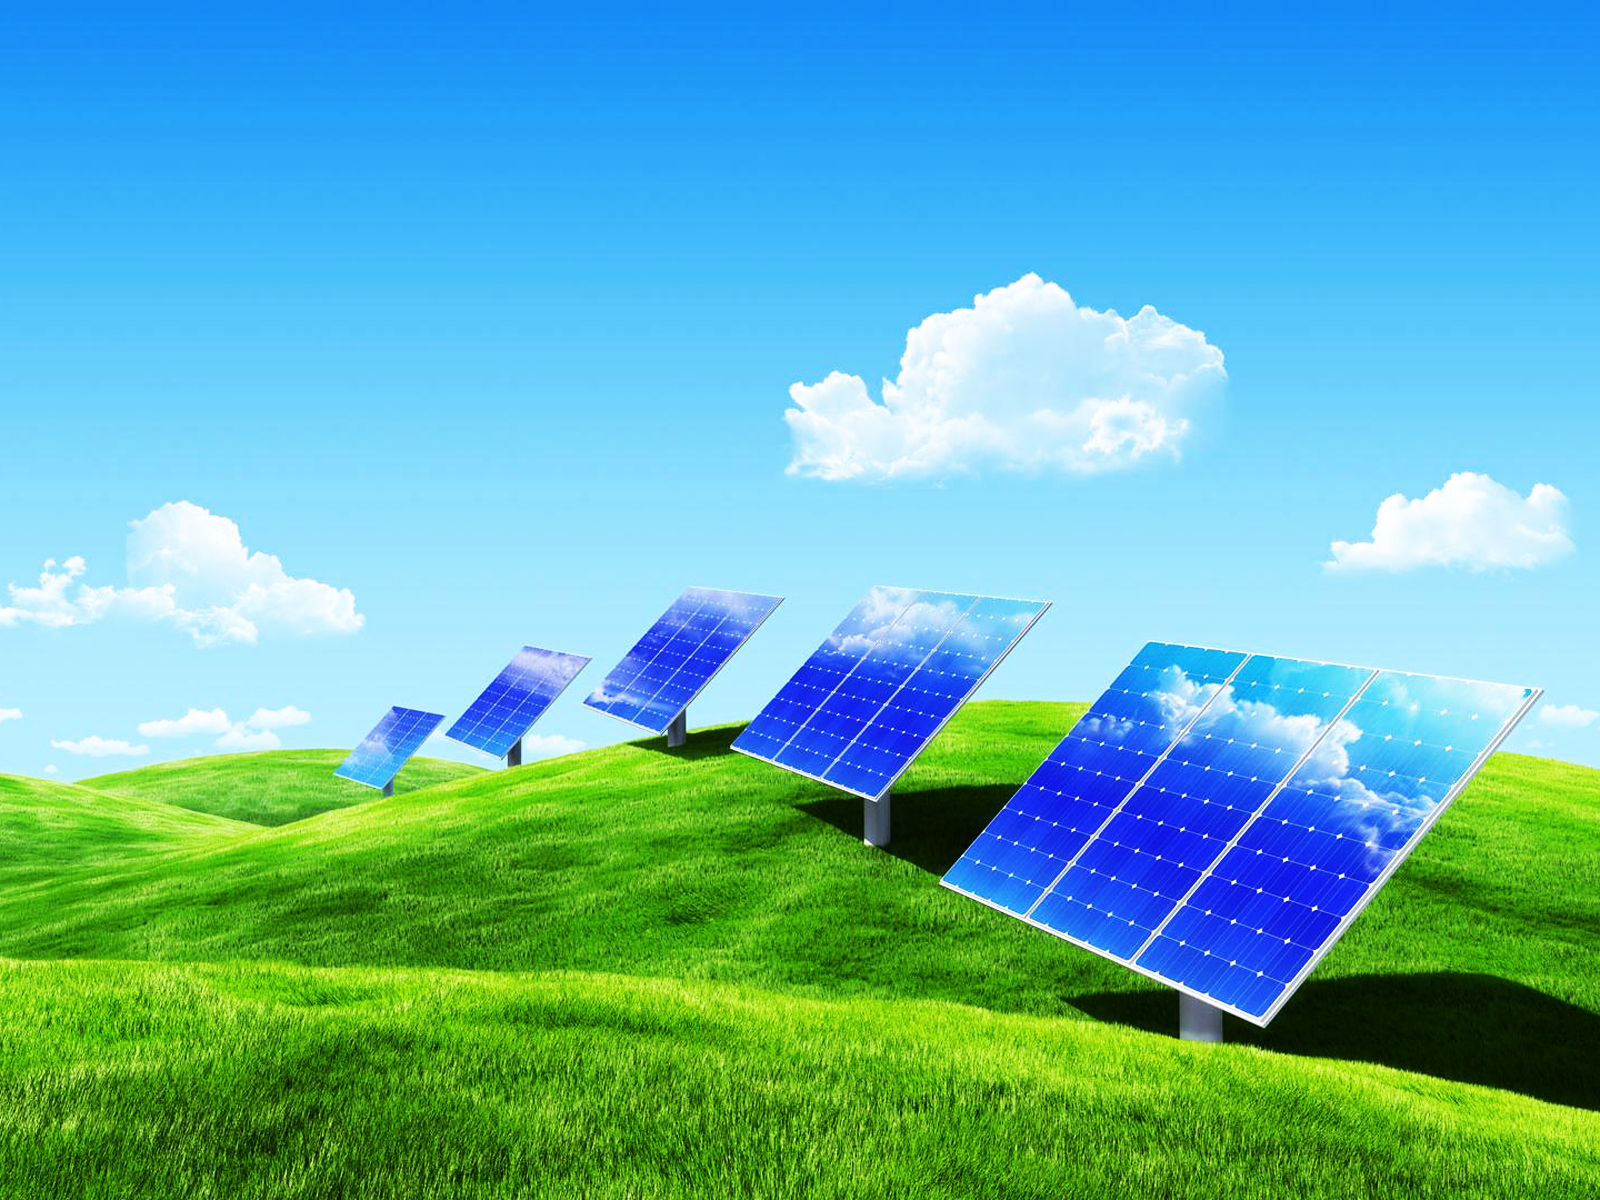 solar-energy-powerpoint-template-ppt-backgrounds-templates